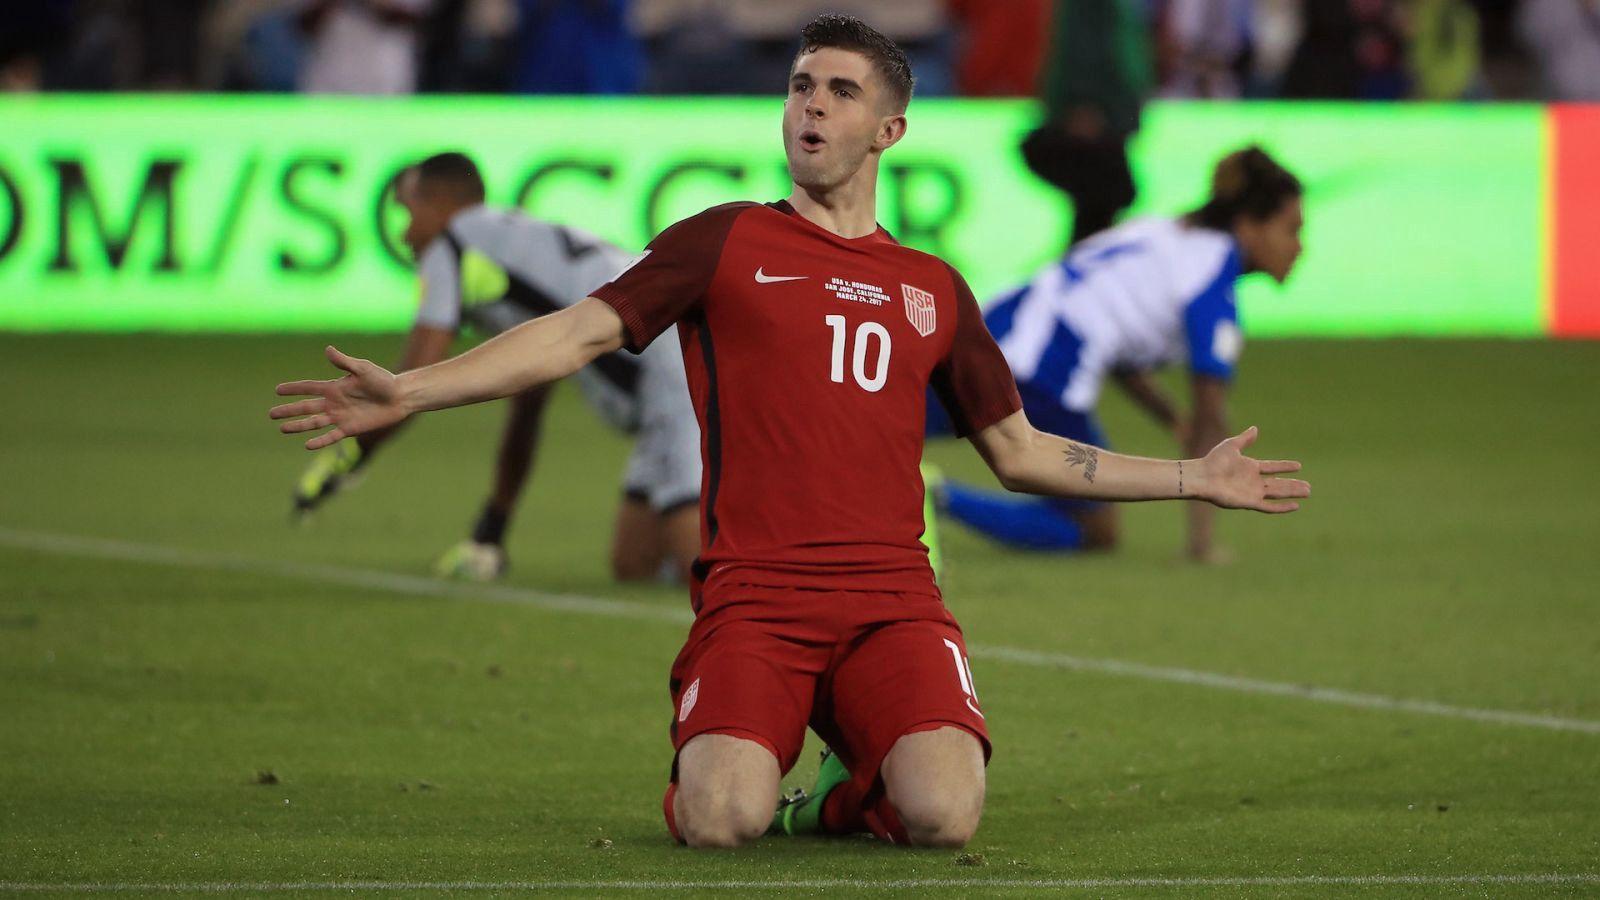 Christian Pulisic Hype Train: It has left the station and it's not